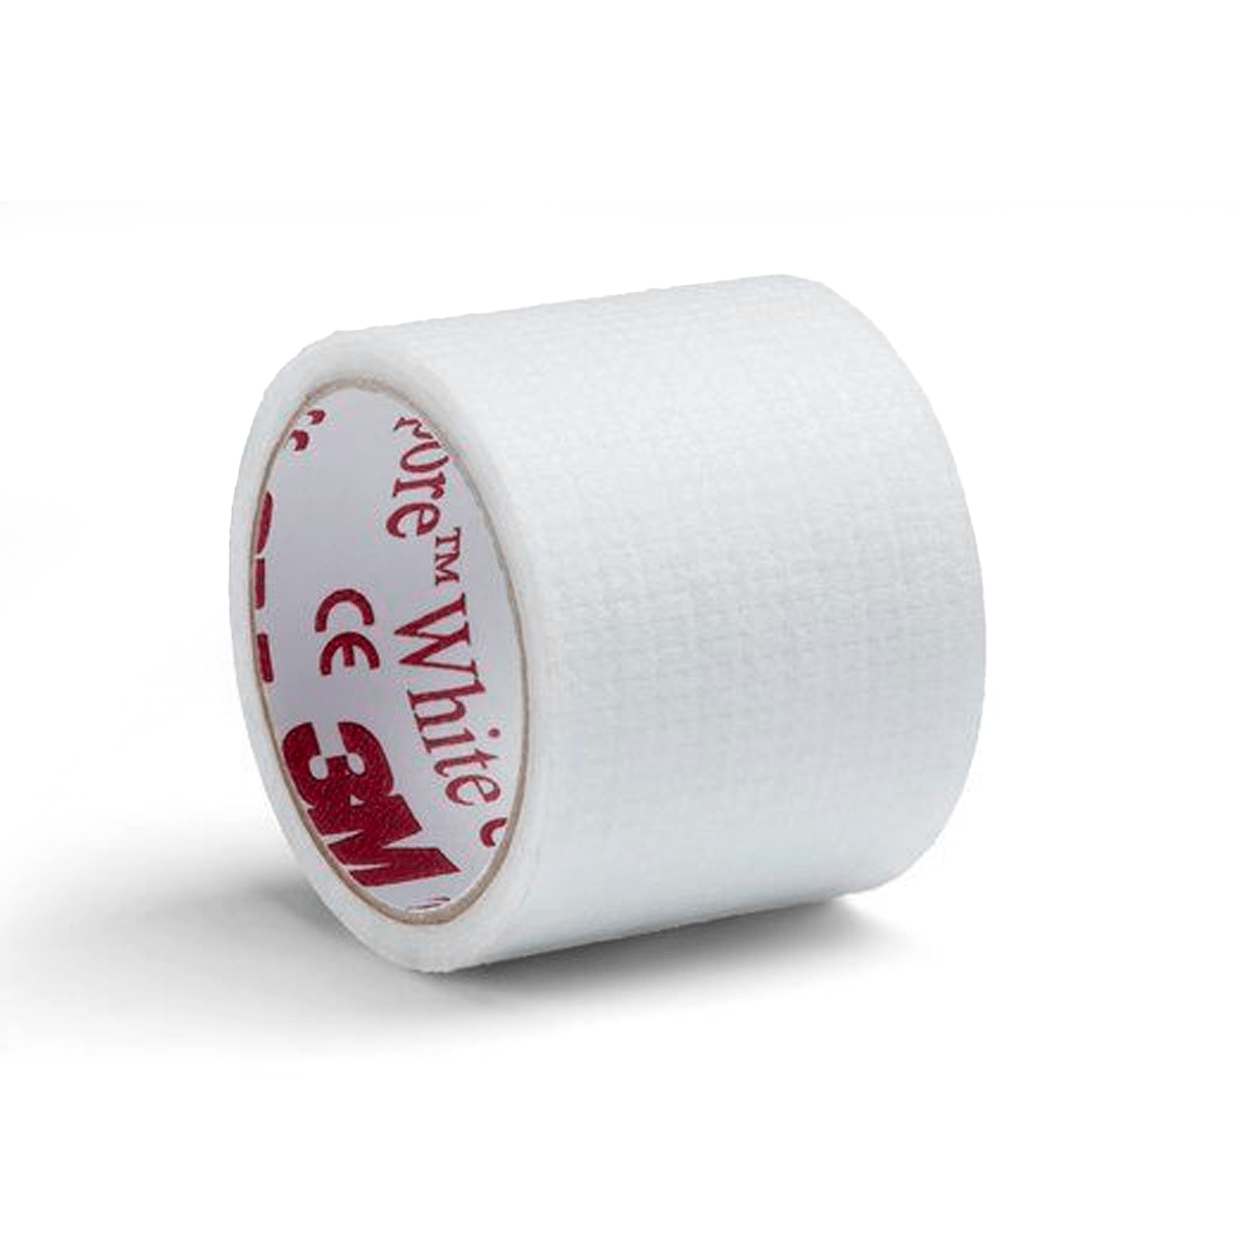 3M Healthcare Surgical Tapes Paper Surgical Tape (Transpore White) Single Patient Use / 25mm x 1.37m 3M Transpore Surgical Tape